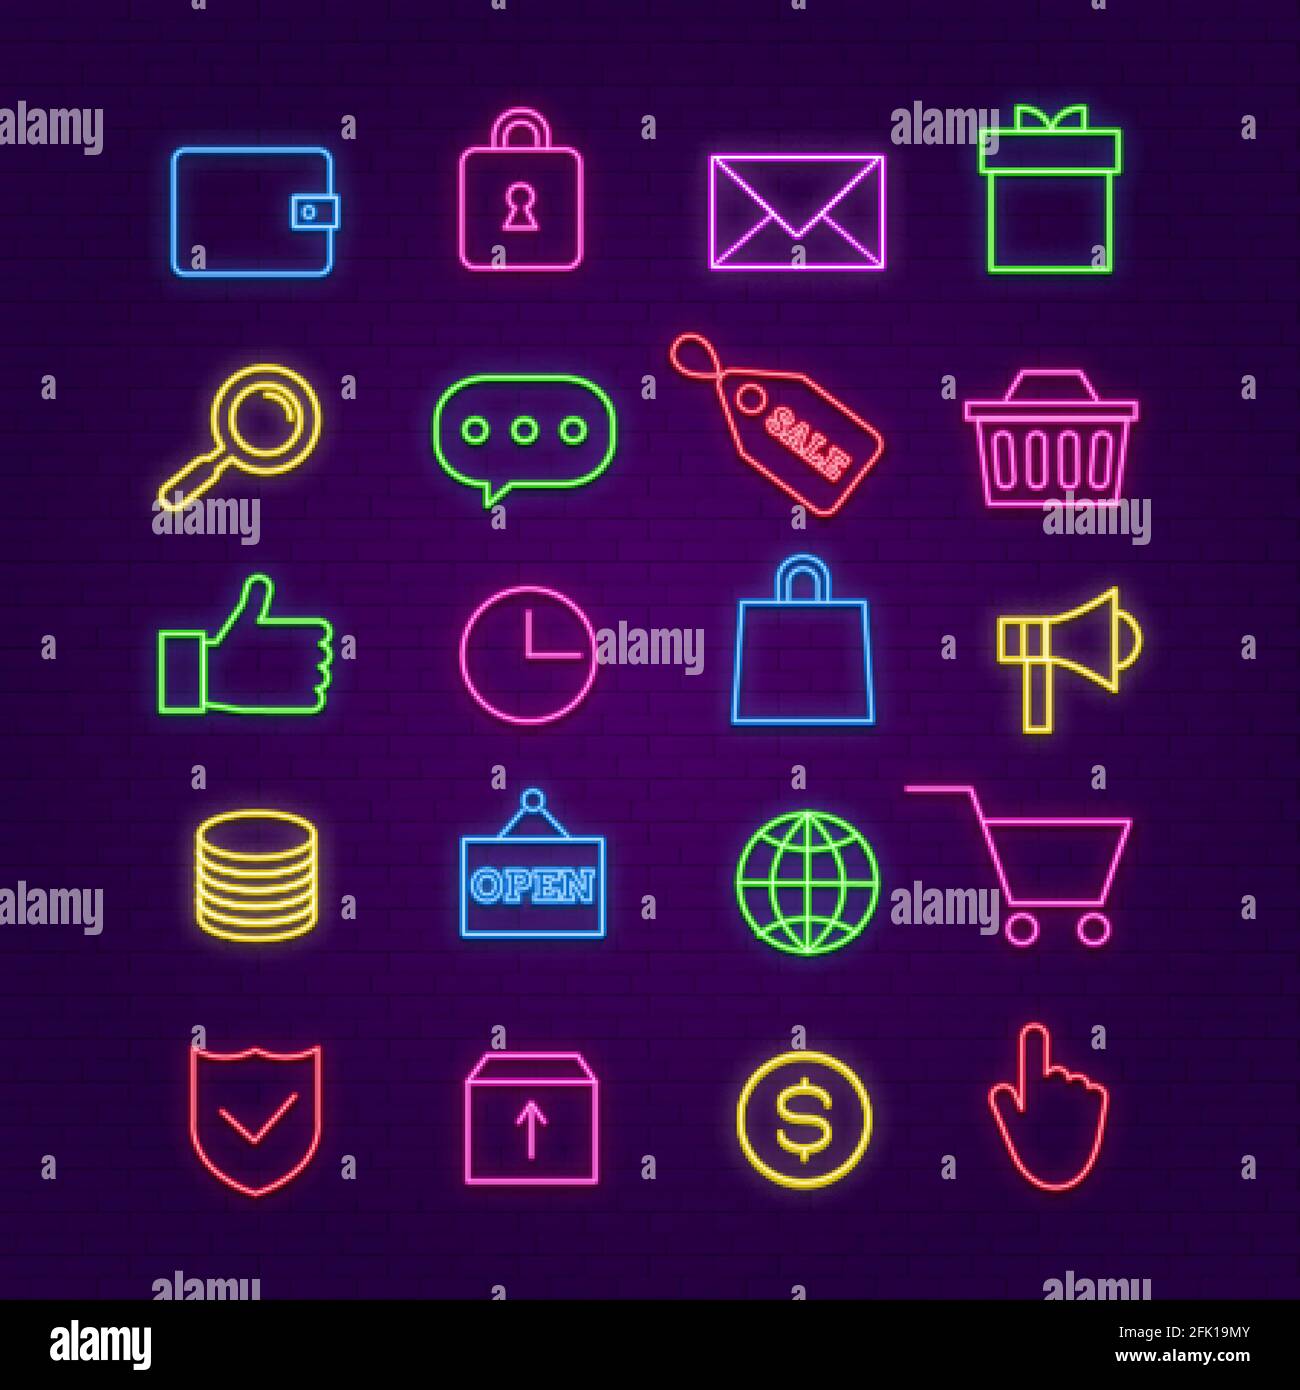 Shopping neon icons. E-commerce, trade colorful signs with glow effects. Store cart, money, box and sale badge vector lighting symbols on brick wall Stock Vector